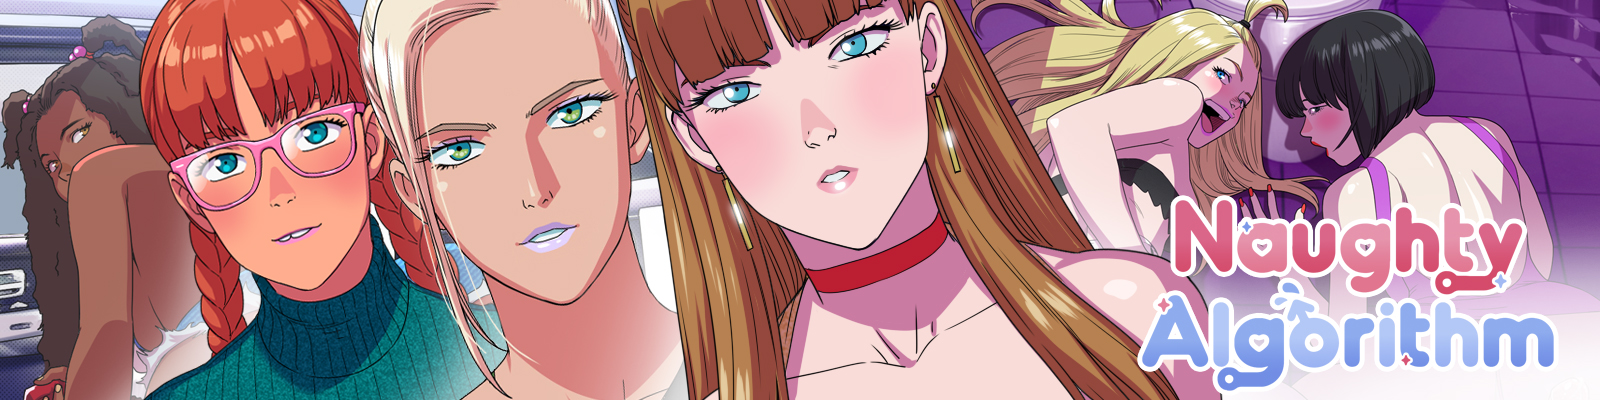 banner_from_patreon-1.jpg